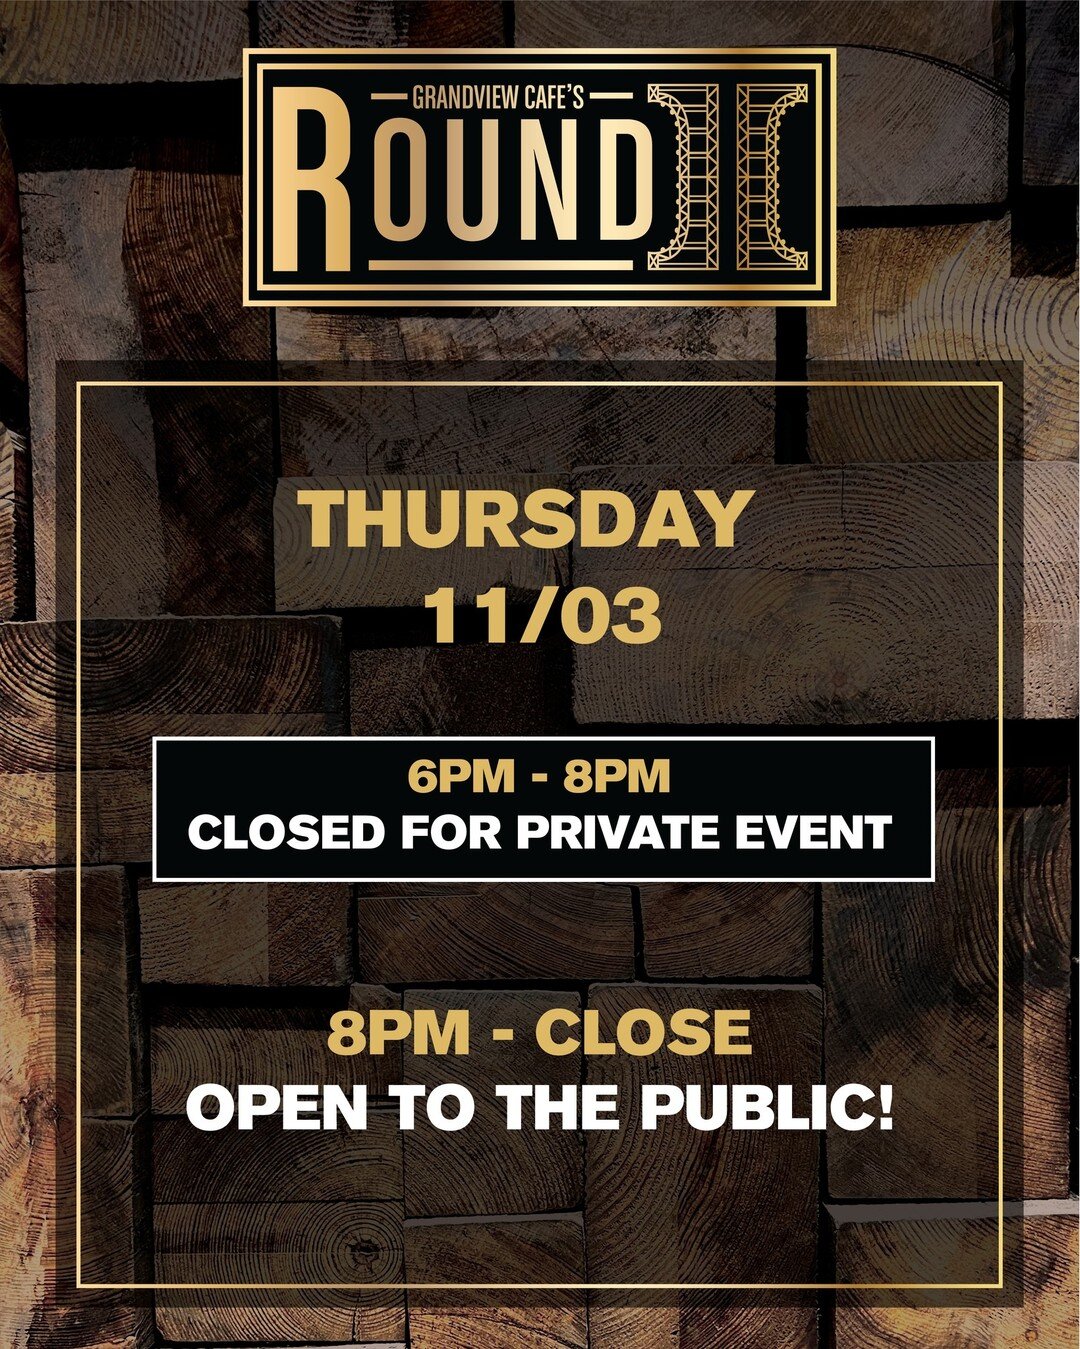 THURSDAY 11/03 | This Thursday Round II will be closed for a private event from 6PM-8PM - But not to worry! We&rsquo;ll be back open at 8PM. We&rsquo;ll see you then!

#cafesround2 #round2 #grandview #grandviewcafe #railhousebar #eatlocal #supportloc